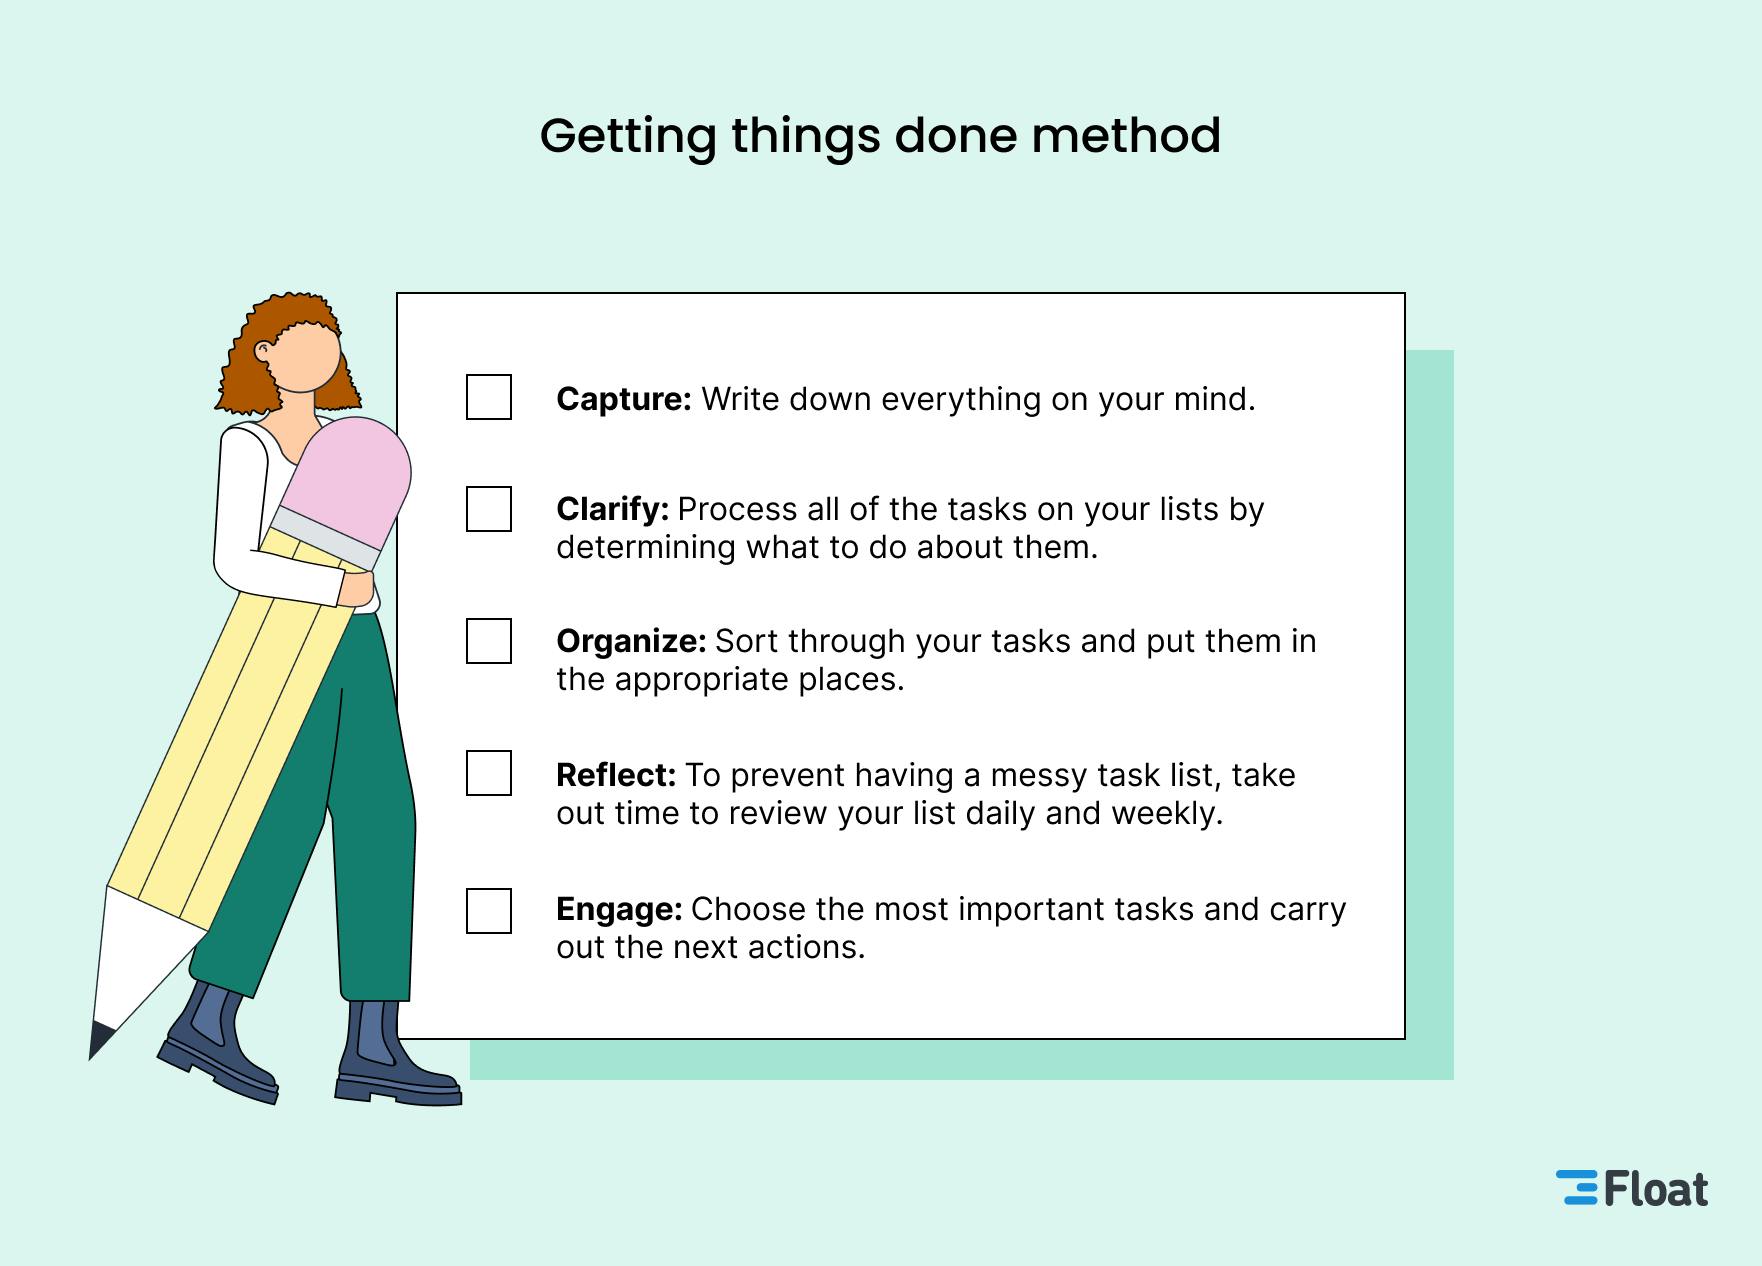 A checklist of the Getting Things Done method